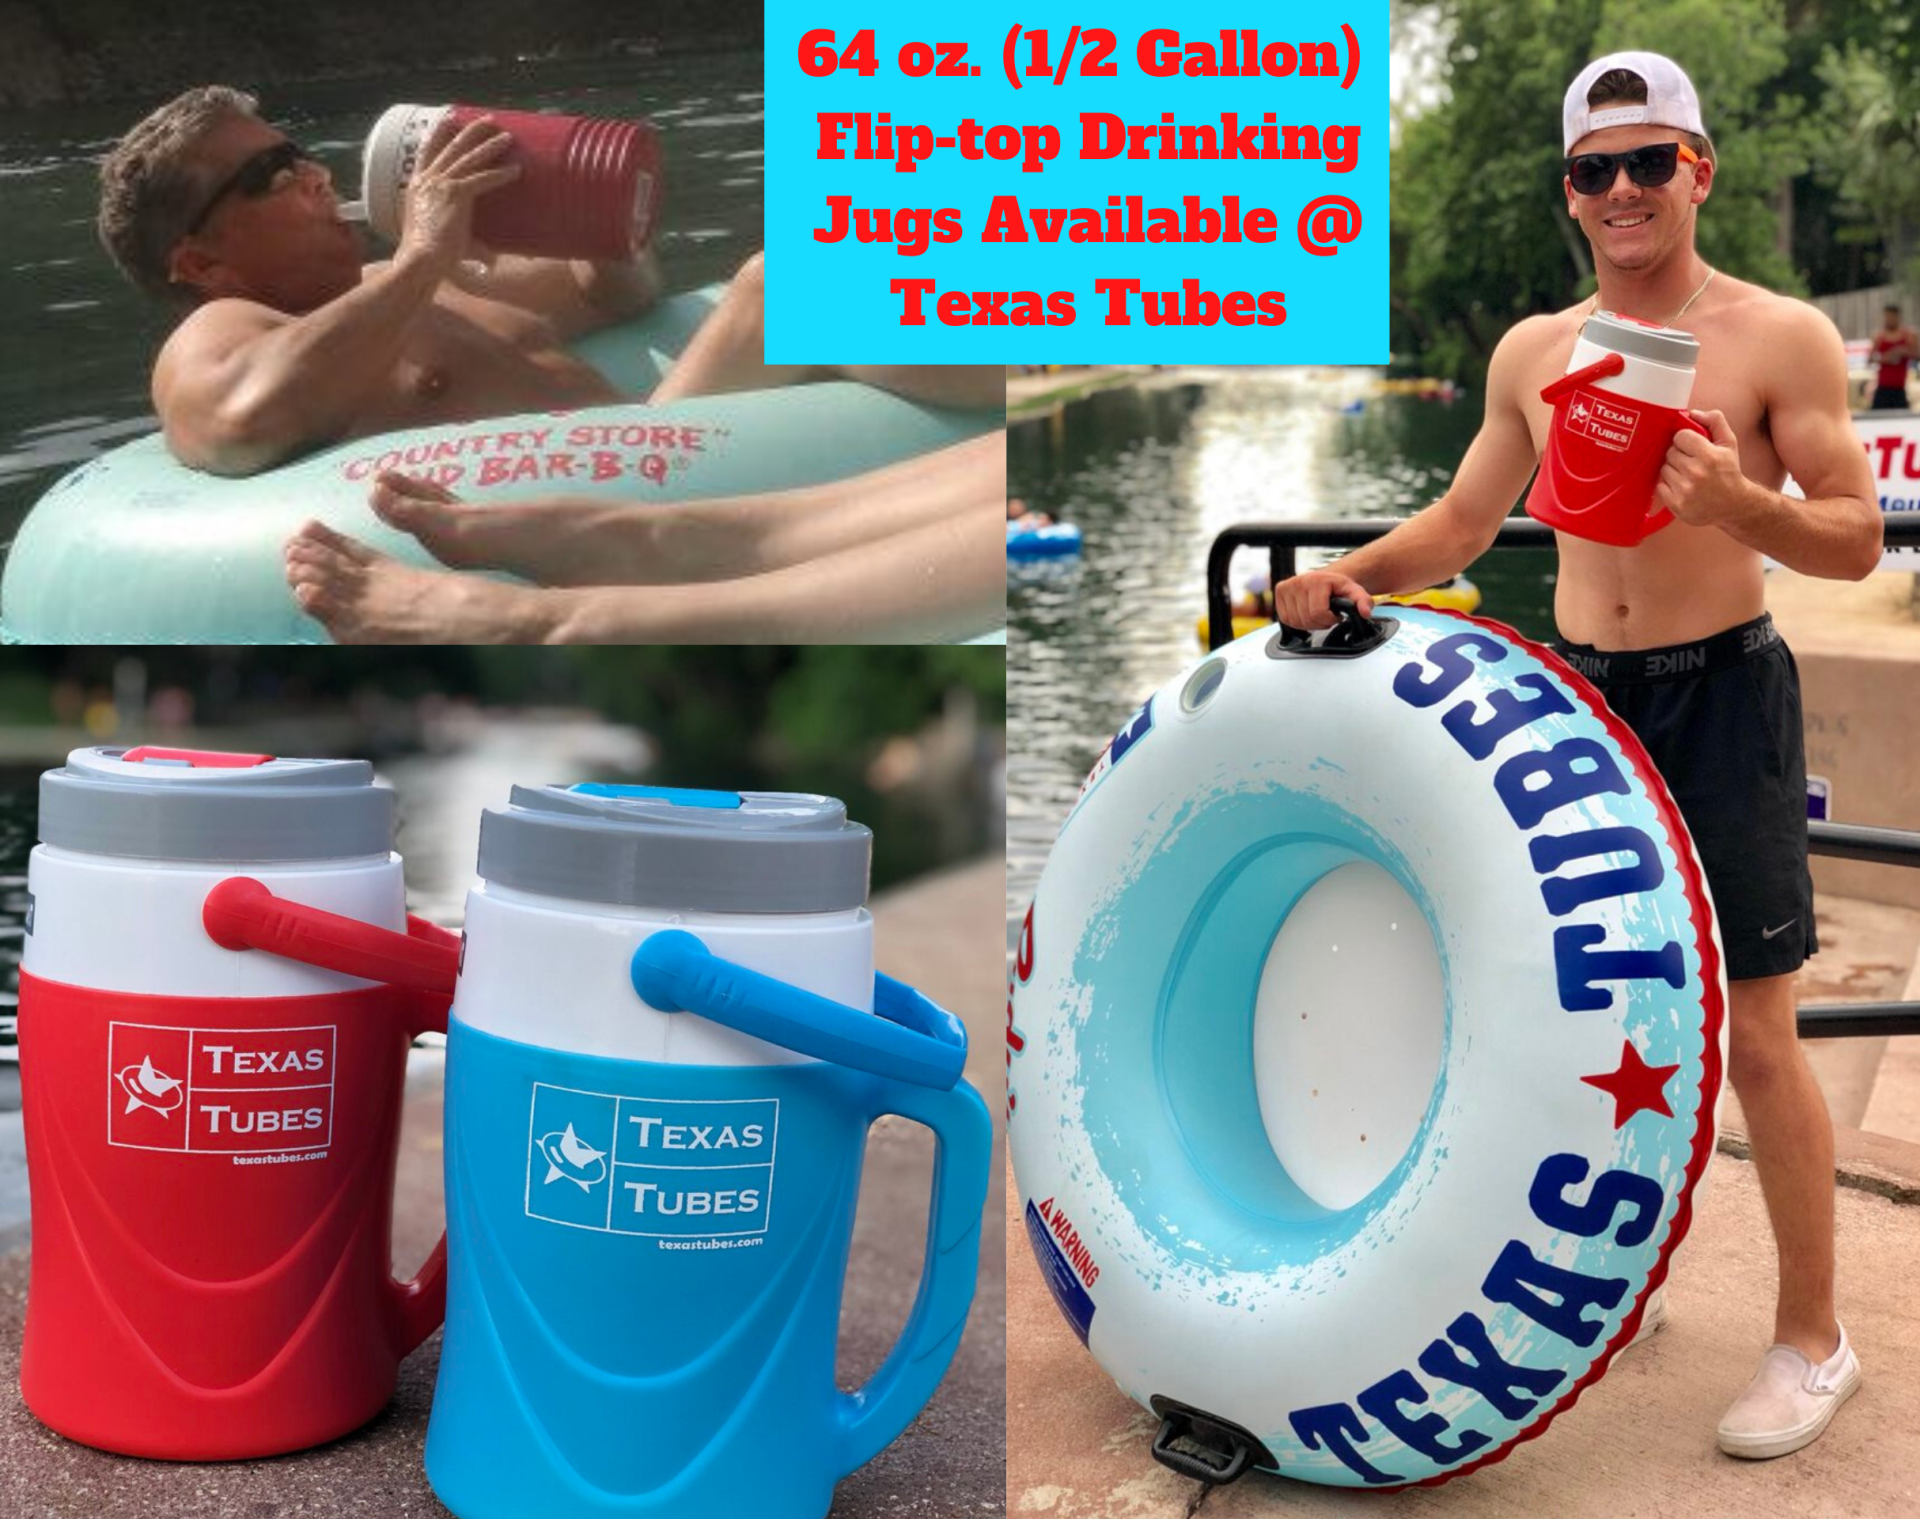 64oz Flip-top Drinking Jugs are legal and are the most popular way to drink your favorite beverage while river tubing and available for $15 each at the Texas Tubes Rental Counter. Bring your favorite beverages on the Comal River, including Alcohol and mixed drinks!